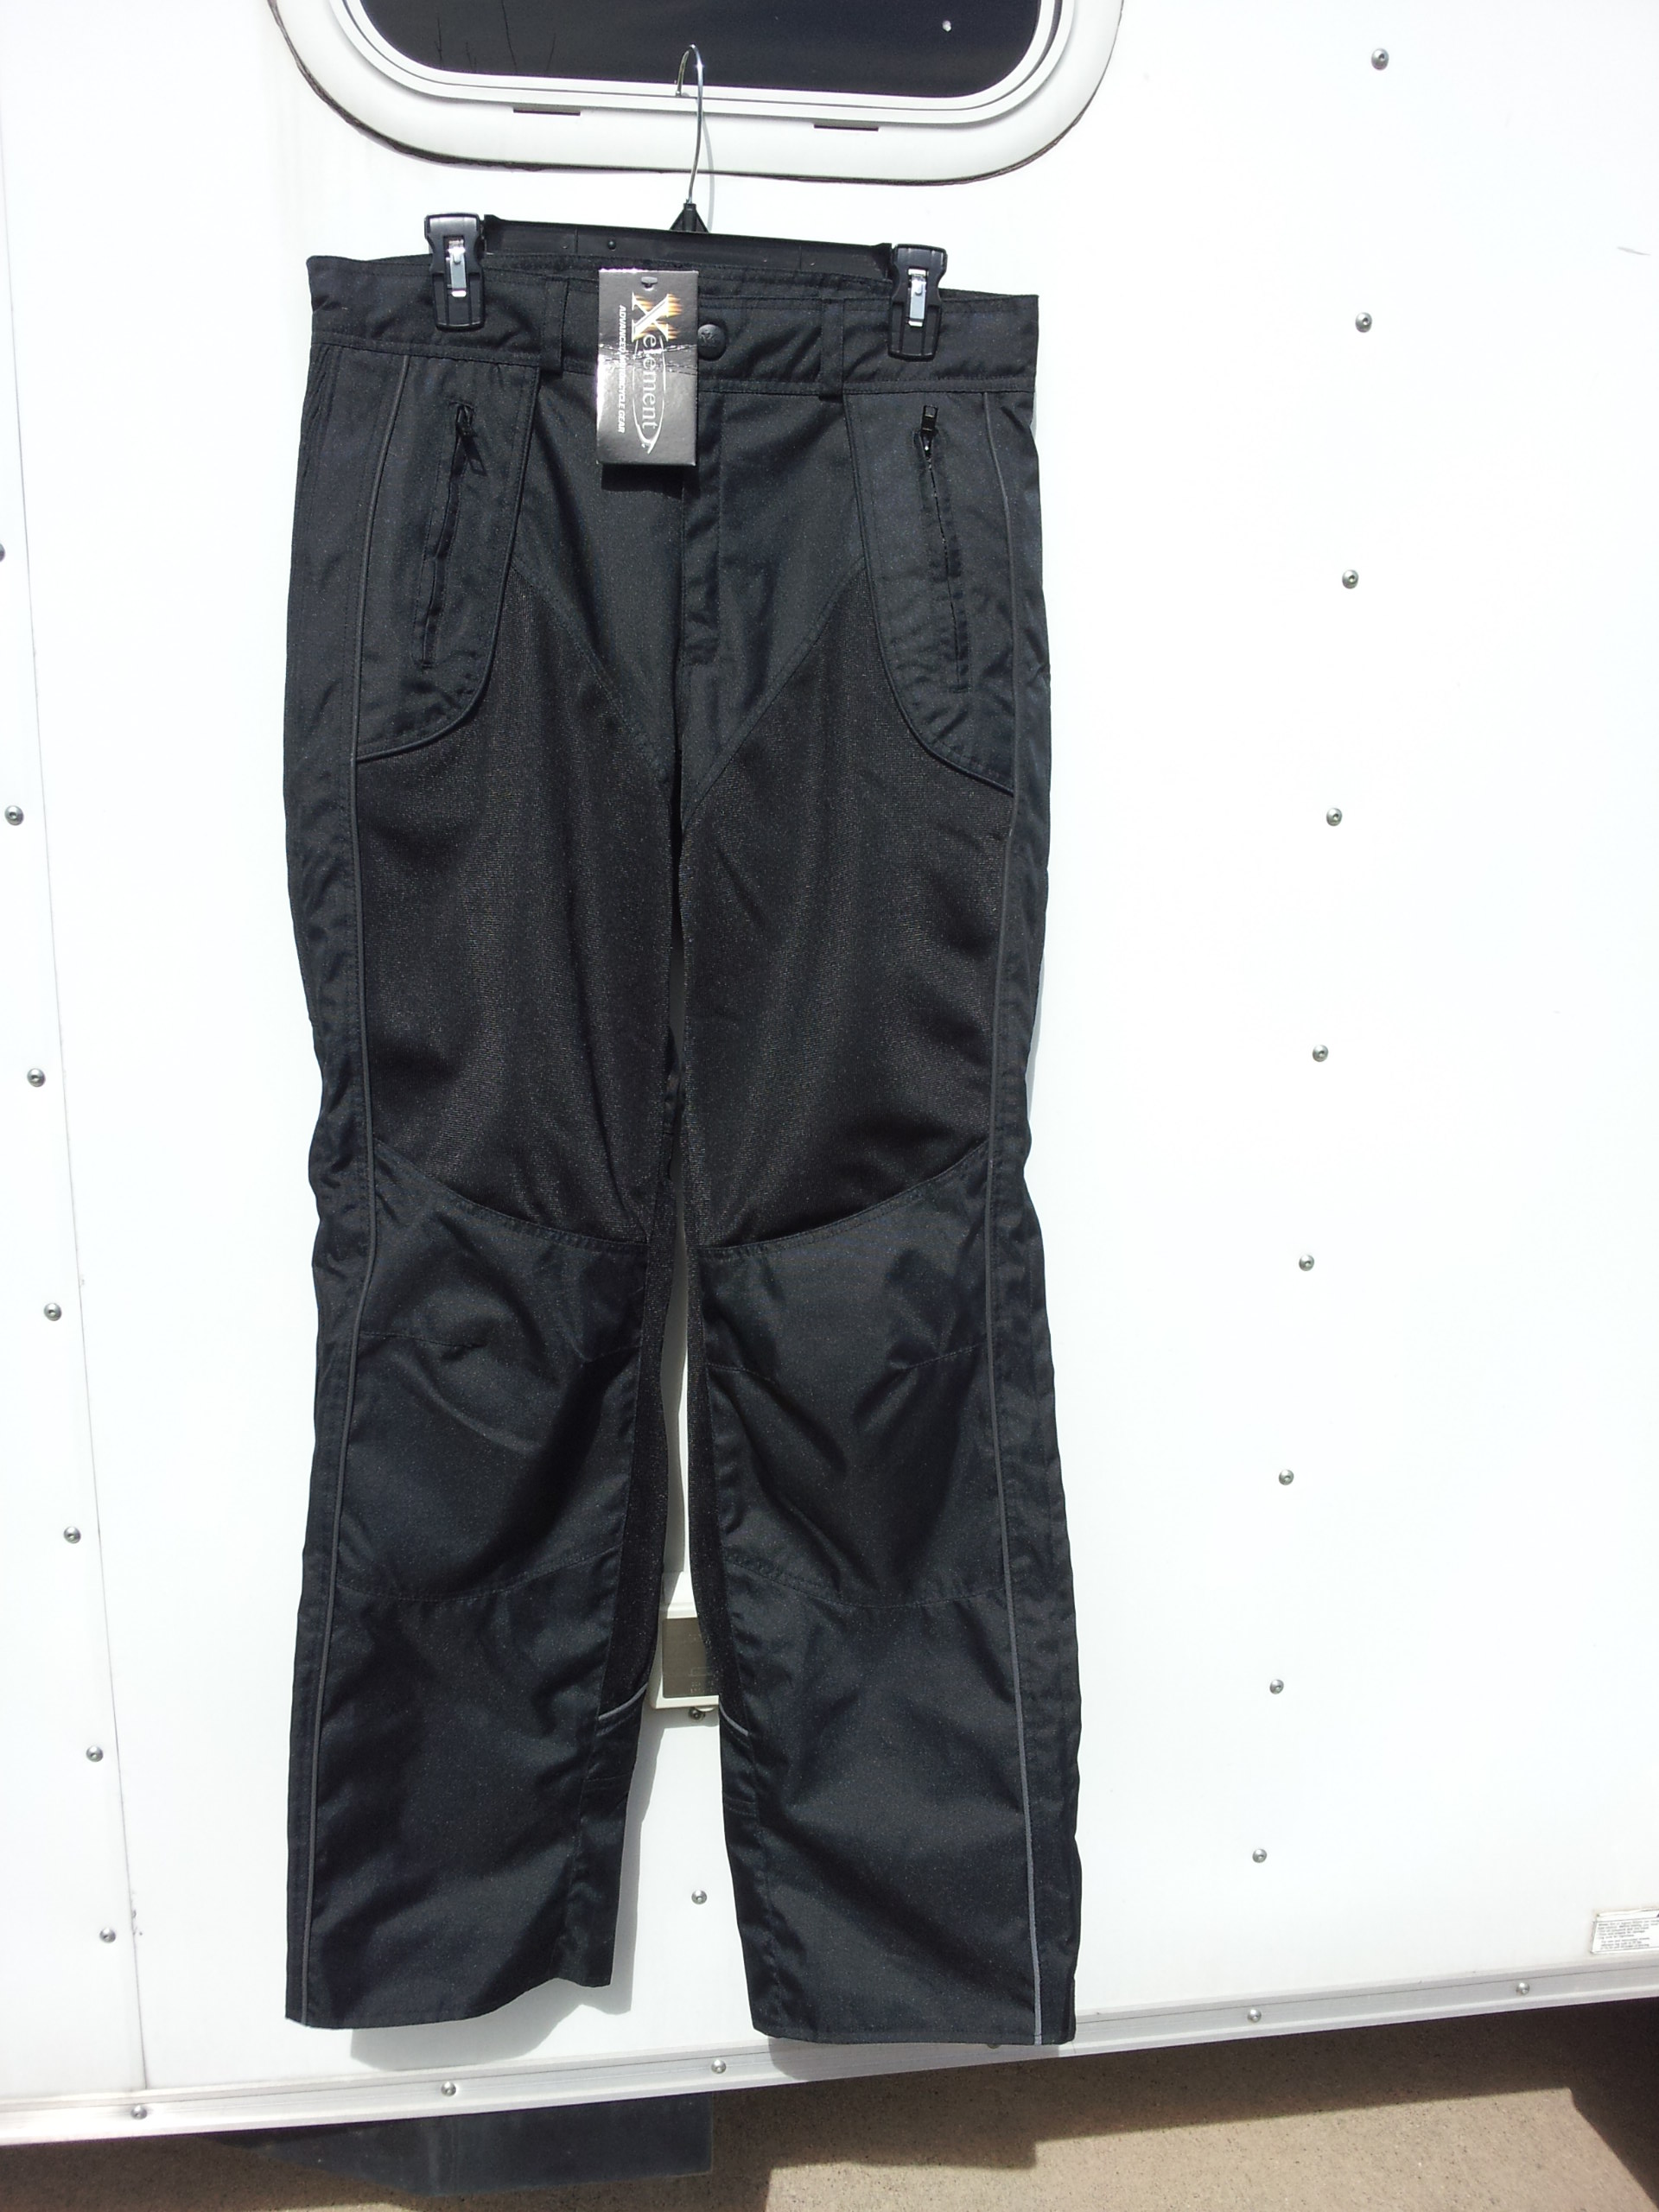 Viewing Images For Xelement Textile Pants for Women :: MotorcycleGear.com